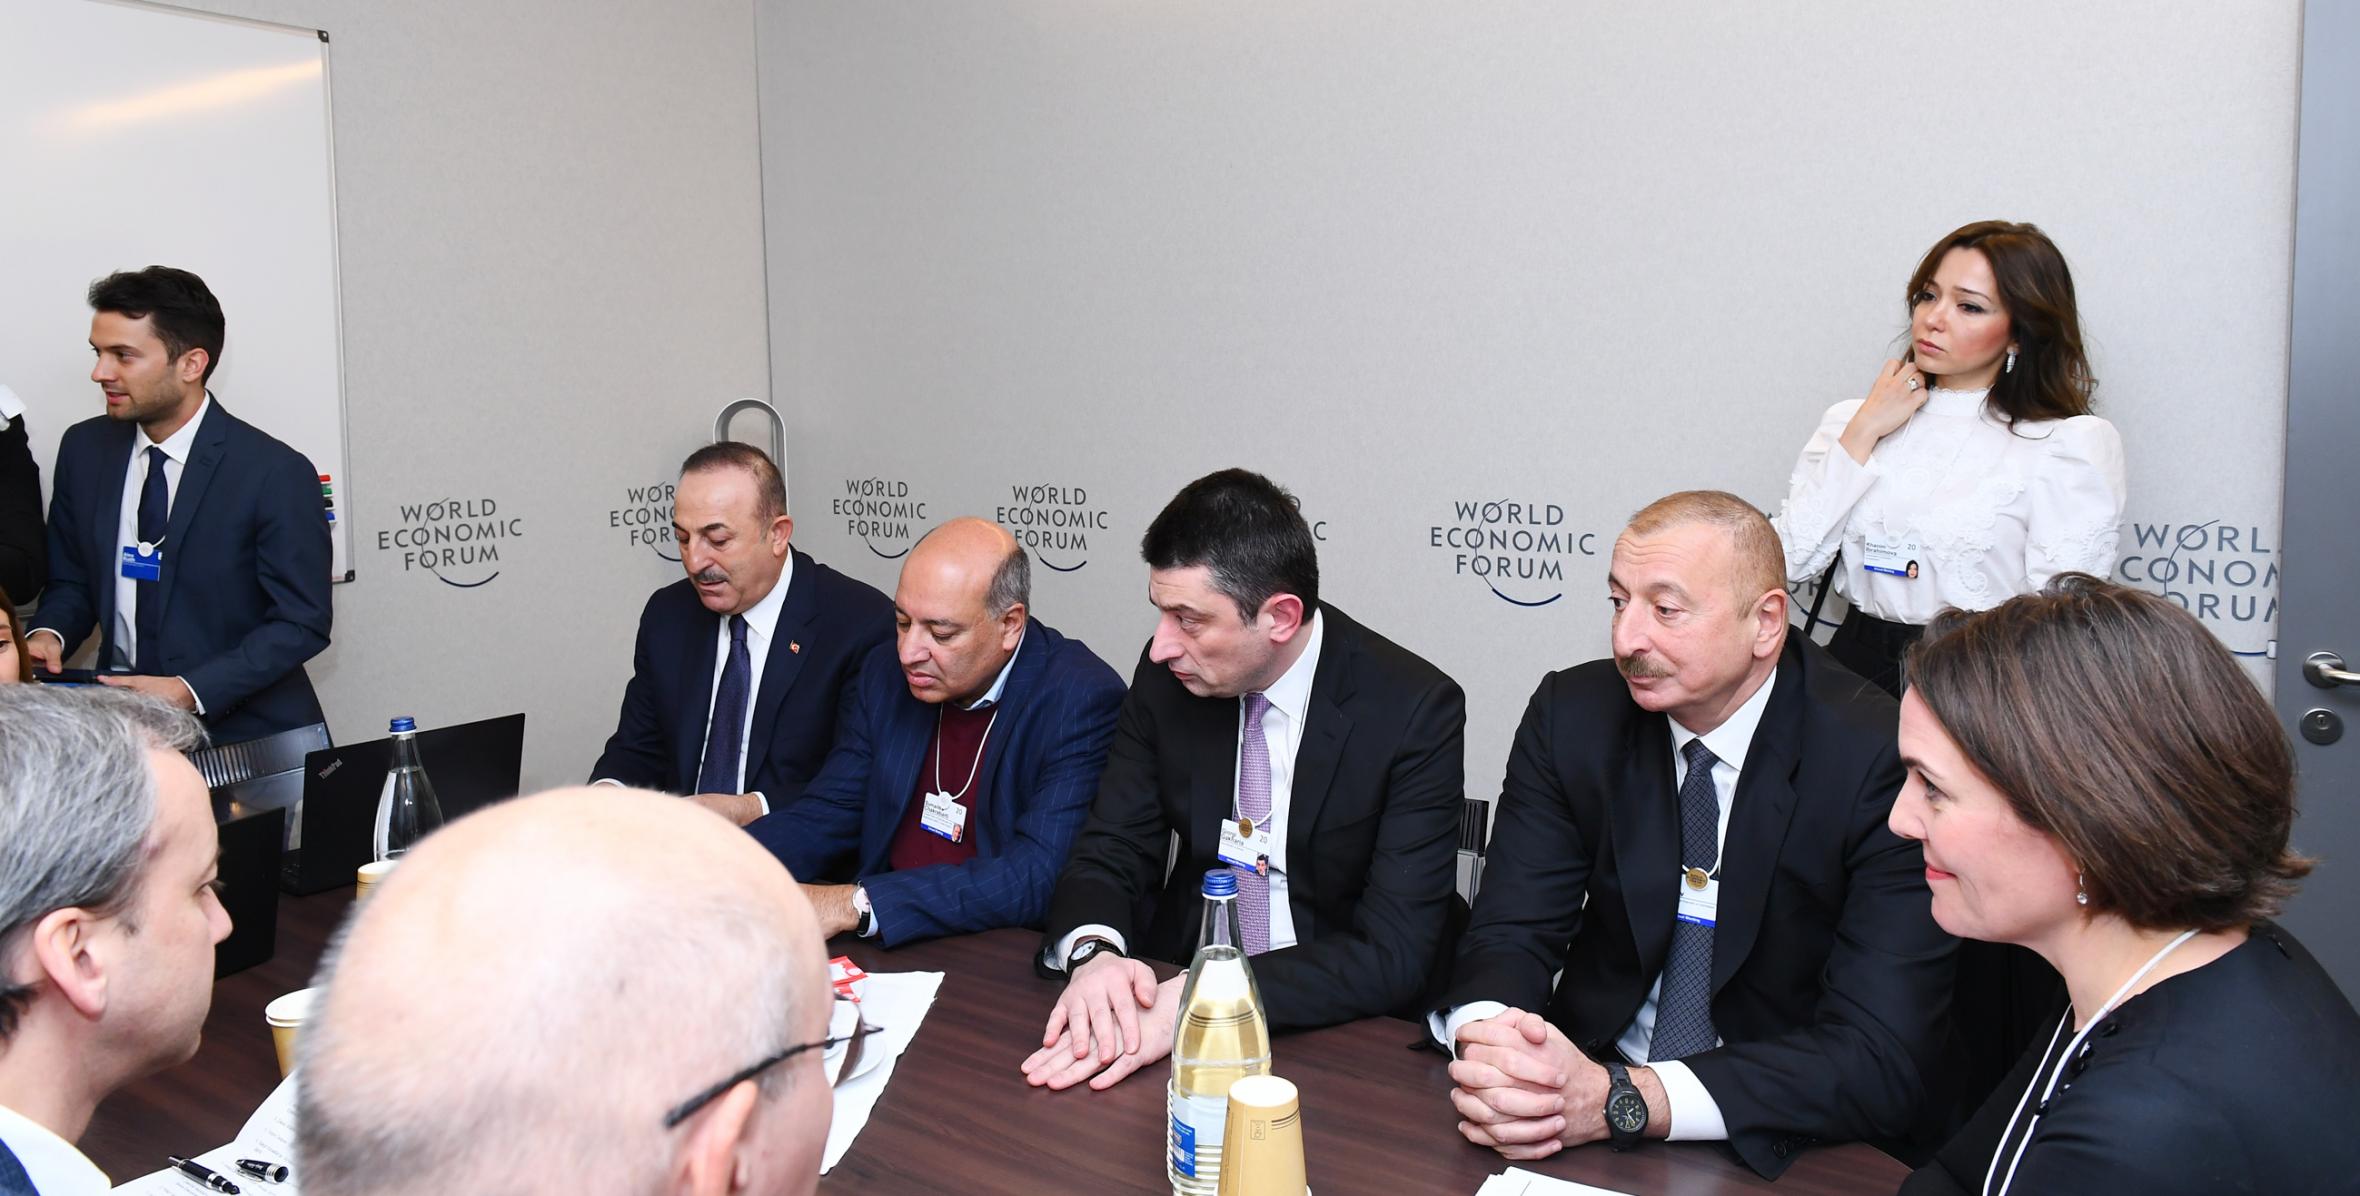 Ilham Aliyev attended session as part of World Economic Forum